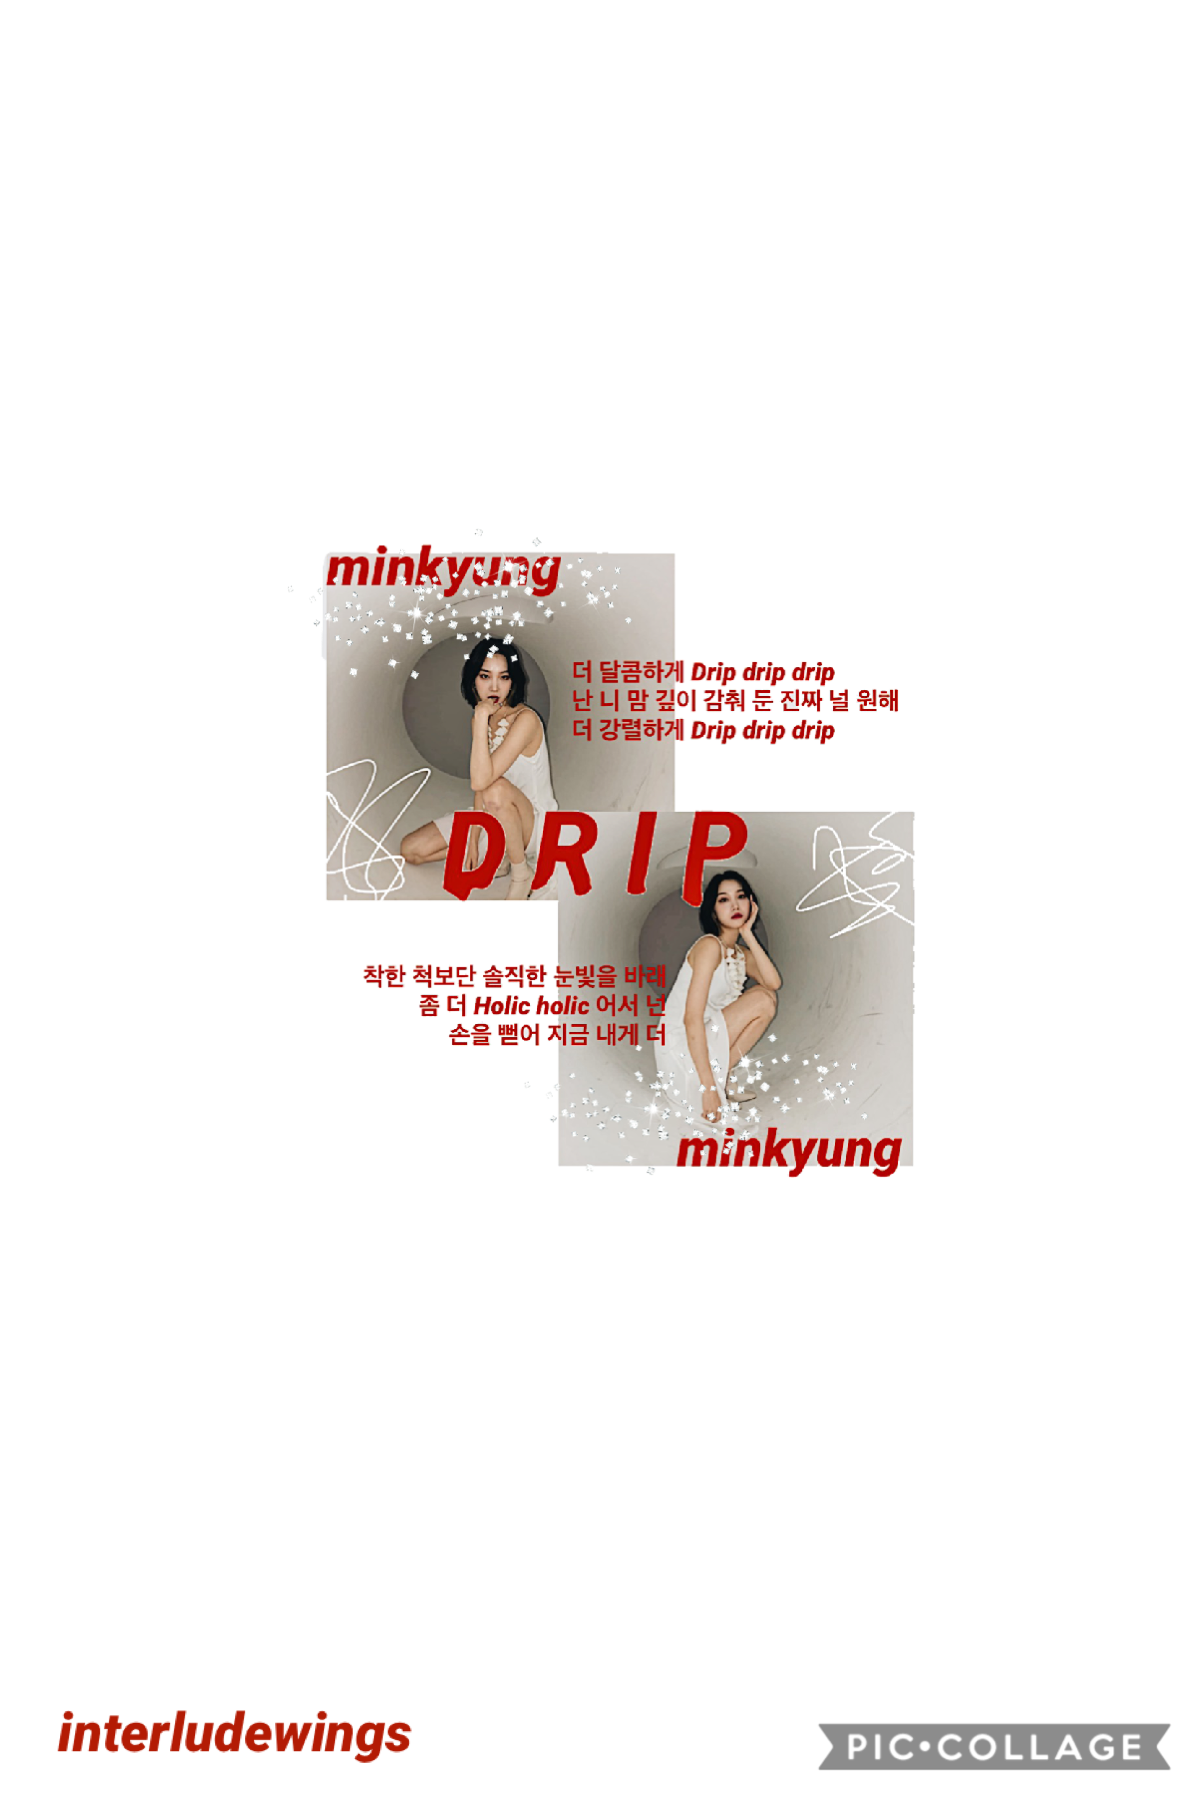 🥀 open 🥀
minkyung~hinapia 
i’m so glad some of the pristin members were able to redebut as hinapia! drip is so good! pls lmk what u think of this edit!! 